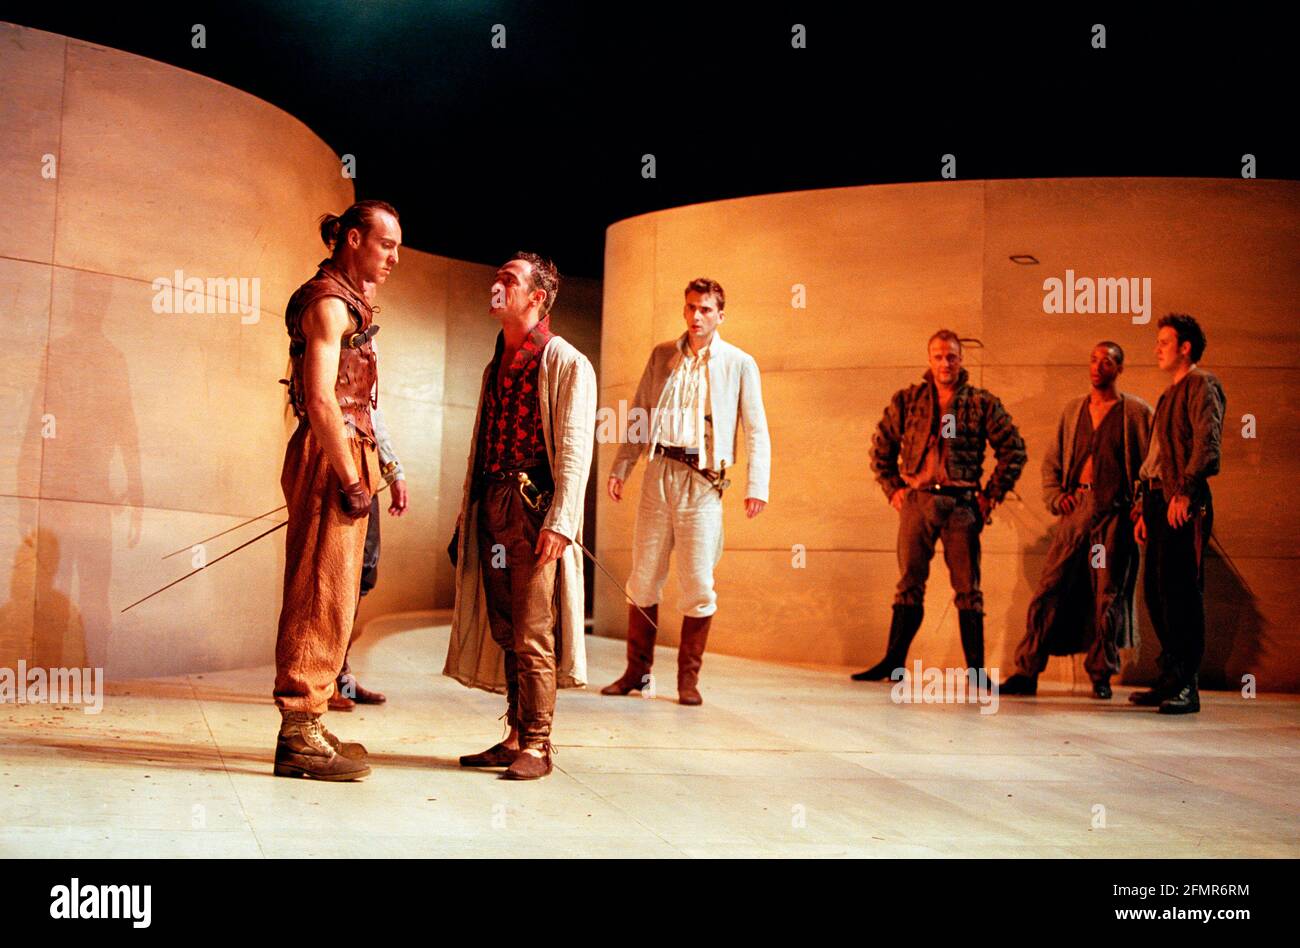 front, l-r: Keith Dunphy (Tybalt), Adrian Schiller (Mercutio), David Tennant (Romeo) in ROMEO AND JULIET by Shakespeare at the Royal Shakespeare Company (RSC), Royal Shakespeare Theatre, Stratford-upon-Avon  05/07/2000  music: Stephen Warbeck  design: Tom Piper  lighting: Chris Davey  fights: Terry King  movement: Liz Ranken  director: Michael Boyd Stock Photo